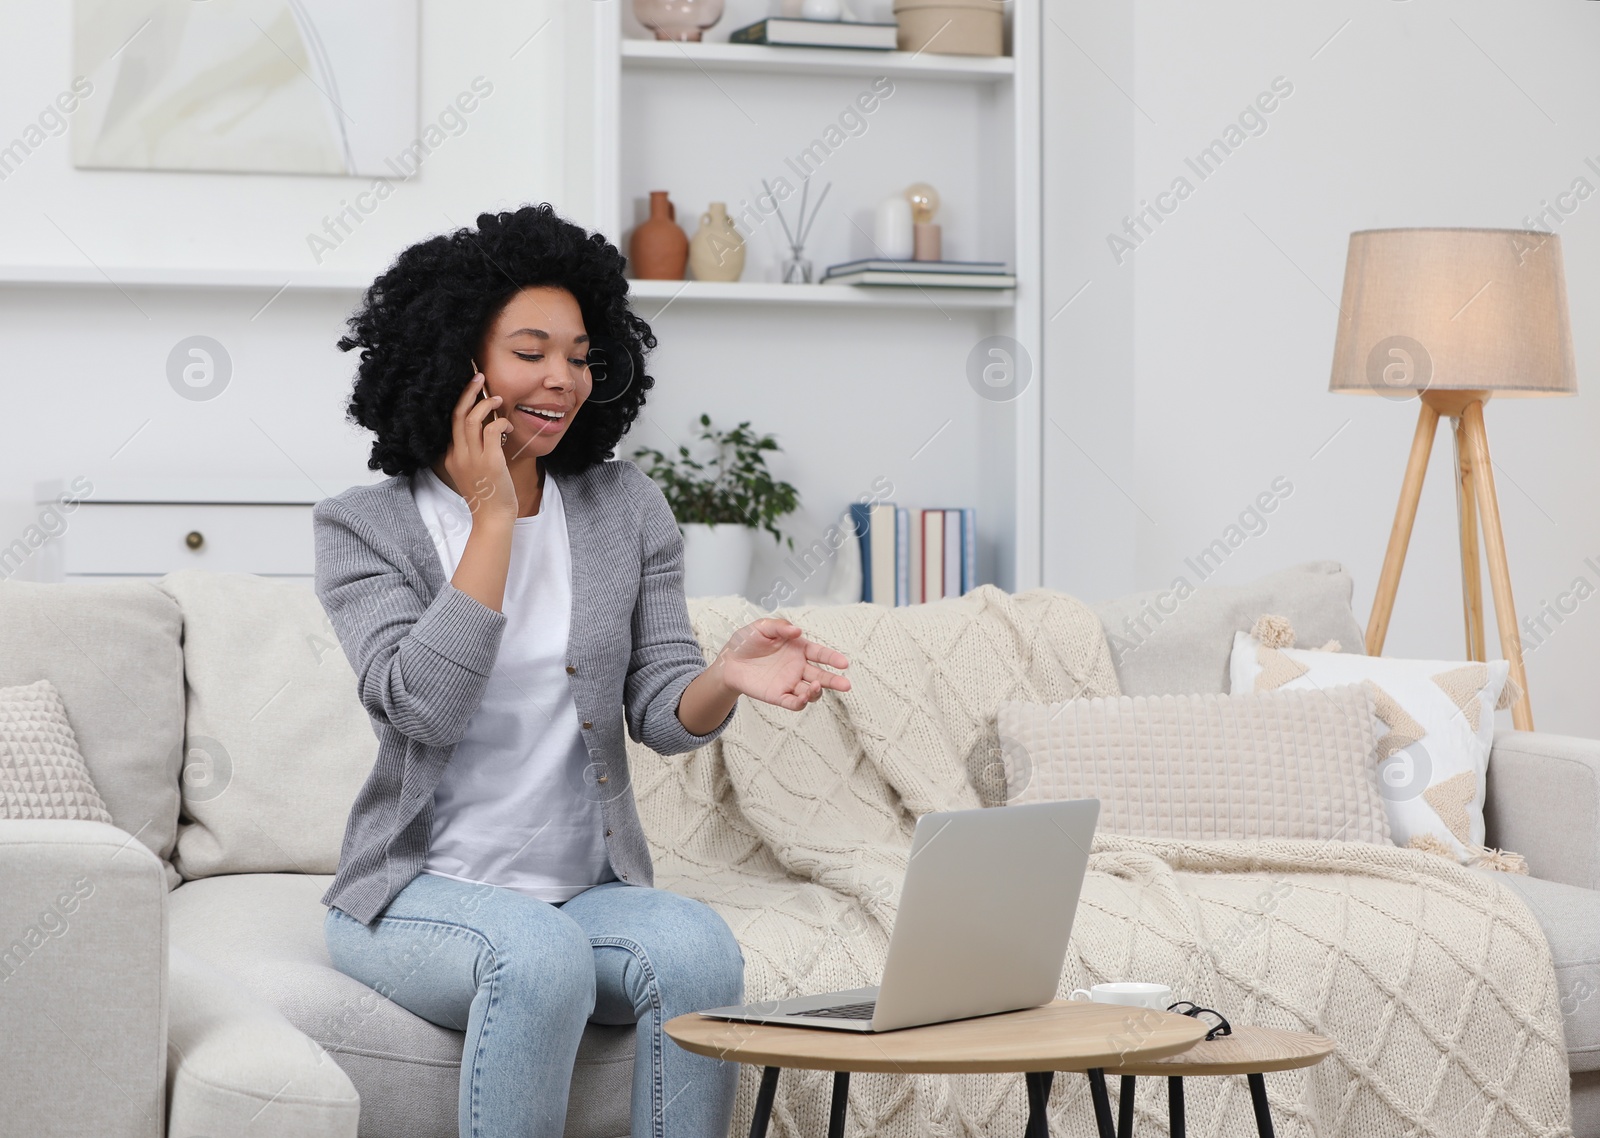 Photo of Happy young woman talking on phone while using laptop at coffee table indoors. Space for text